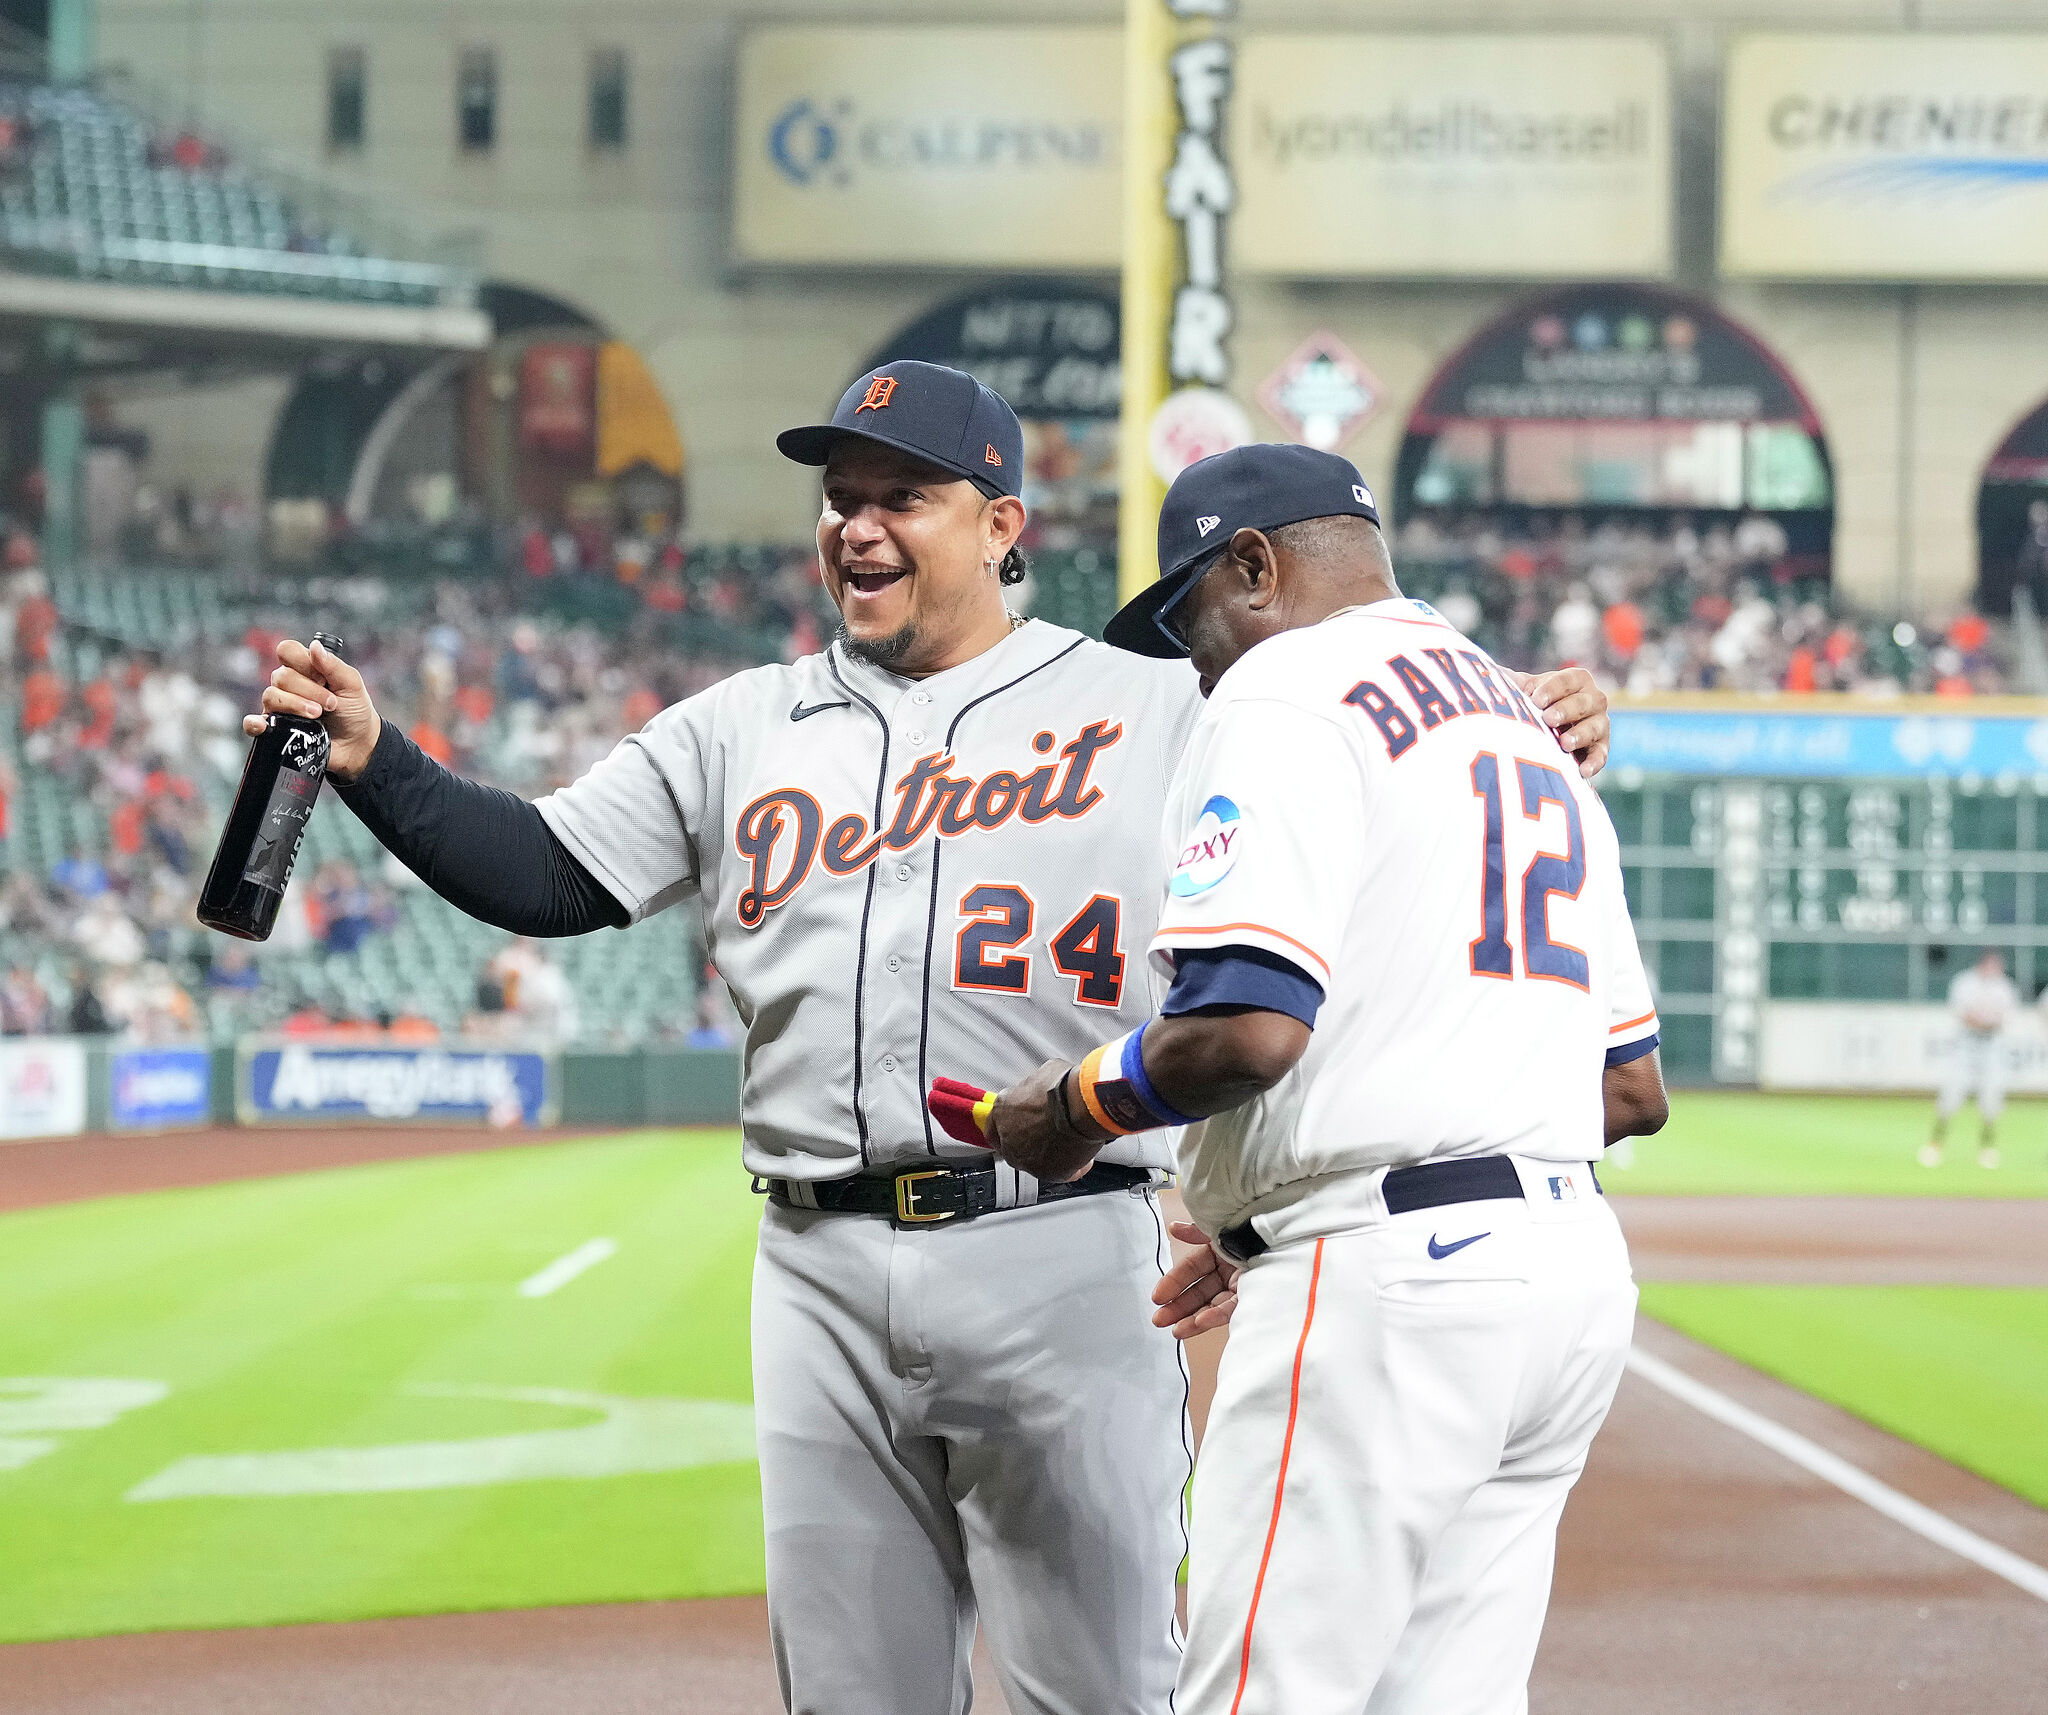 Watch: Miguel Cabrera earns Texas-sized farewell from Astros